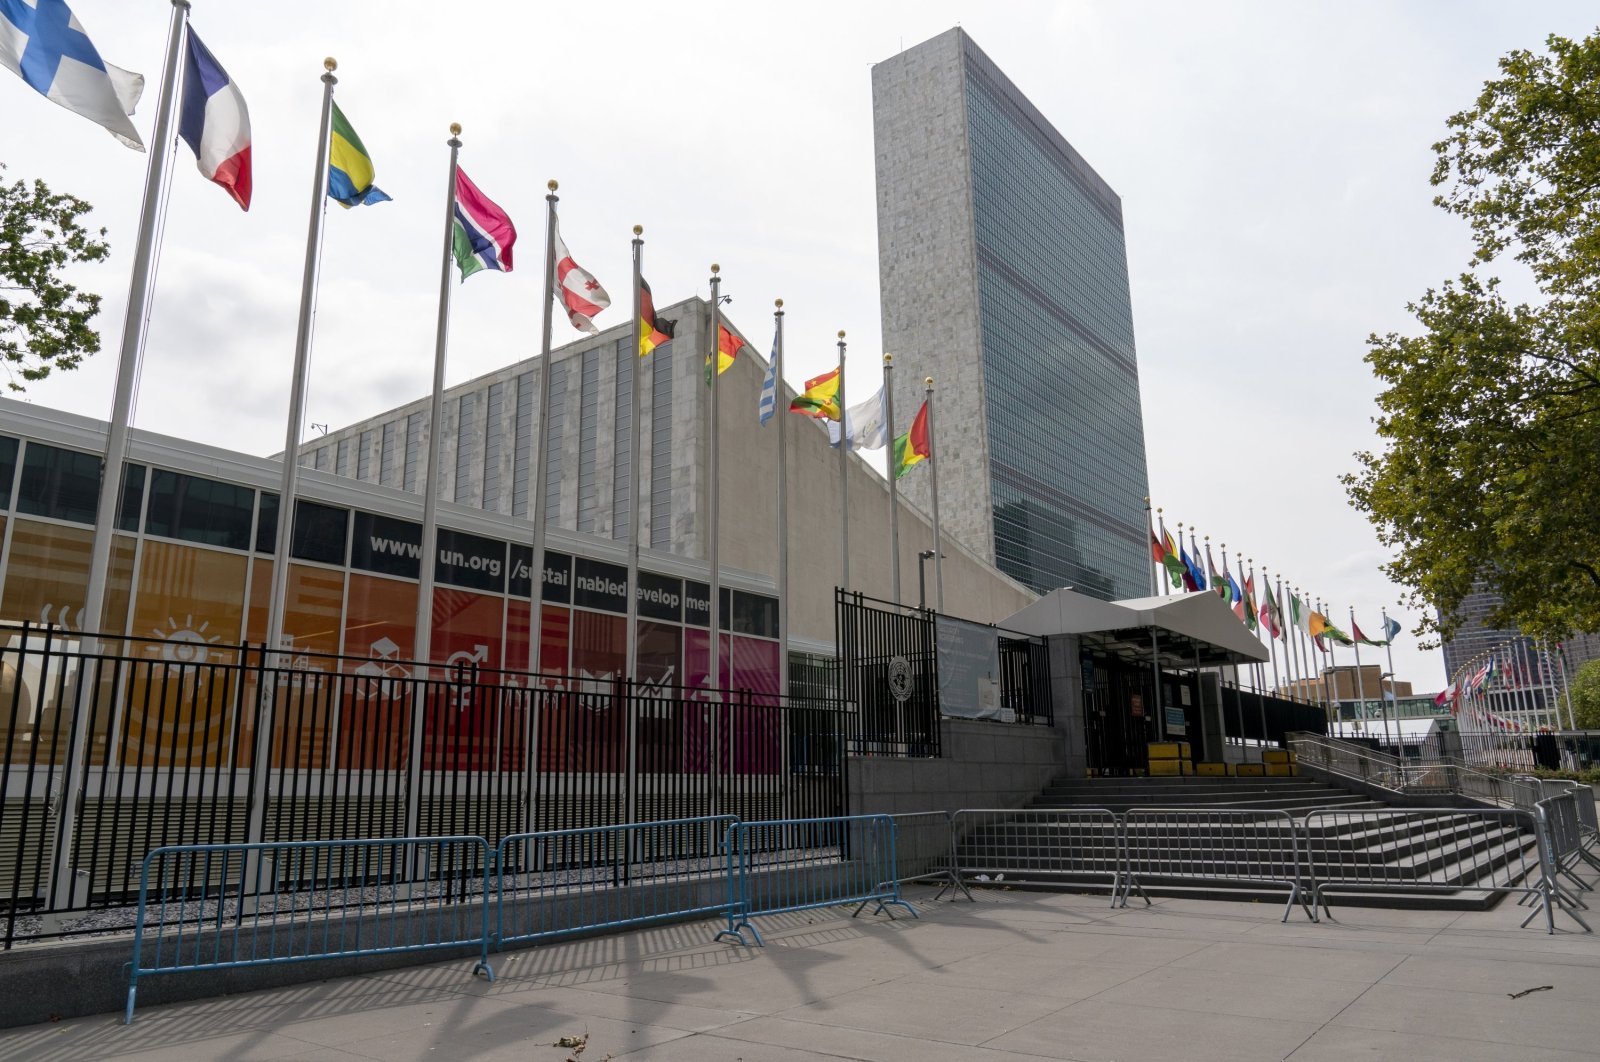 Metal barricades line the shuttered main entrance to the United Nations headquarters in New York City, New York, U.S., Sept. 18, 2020. (AP Photo)